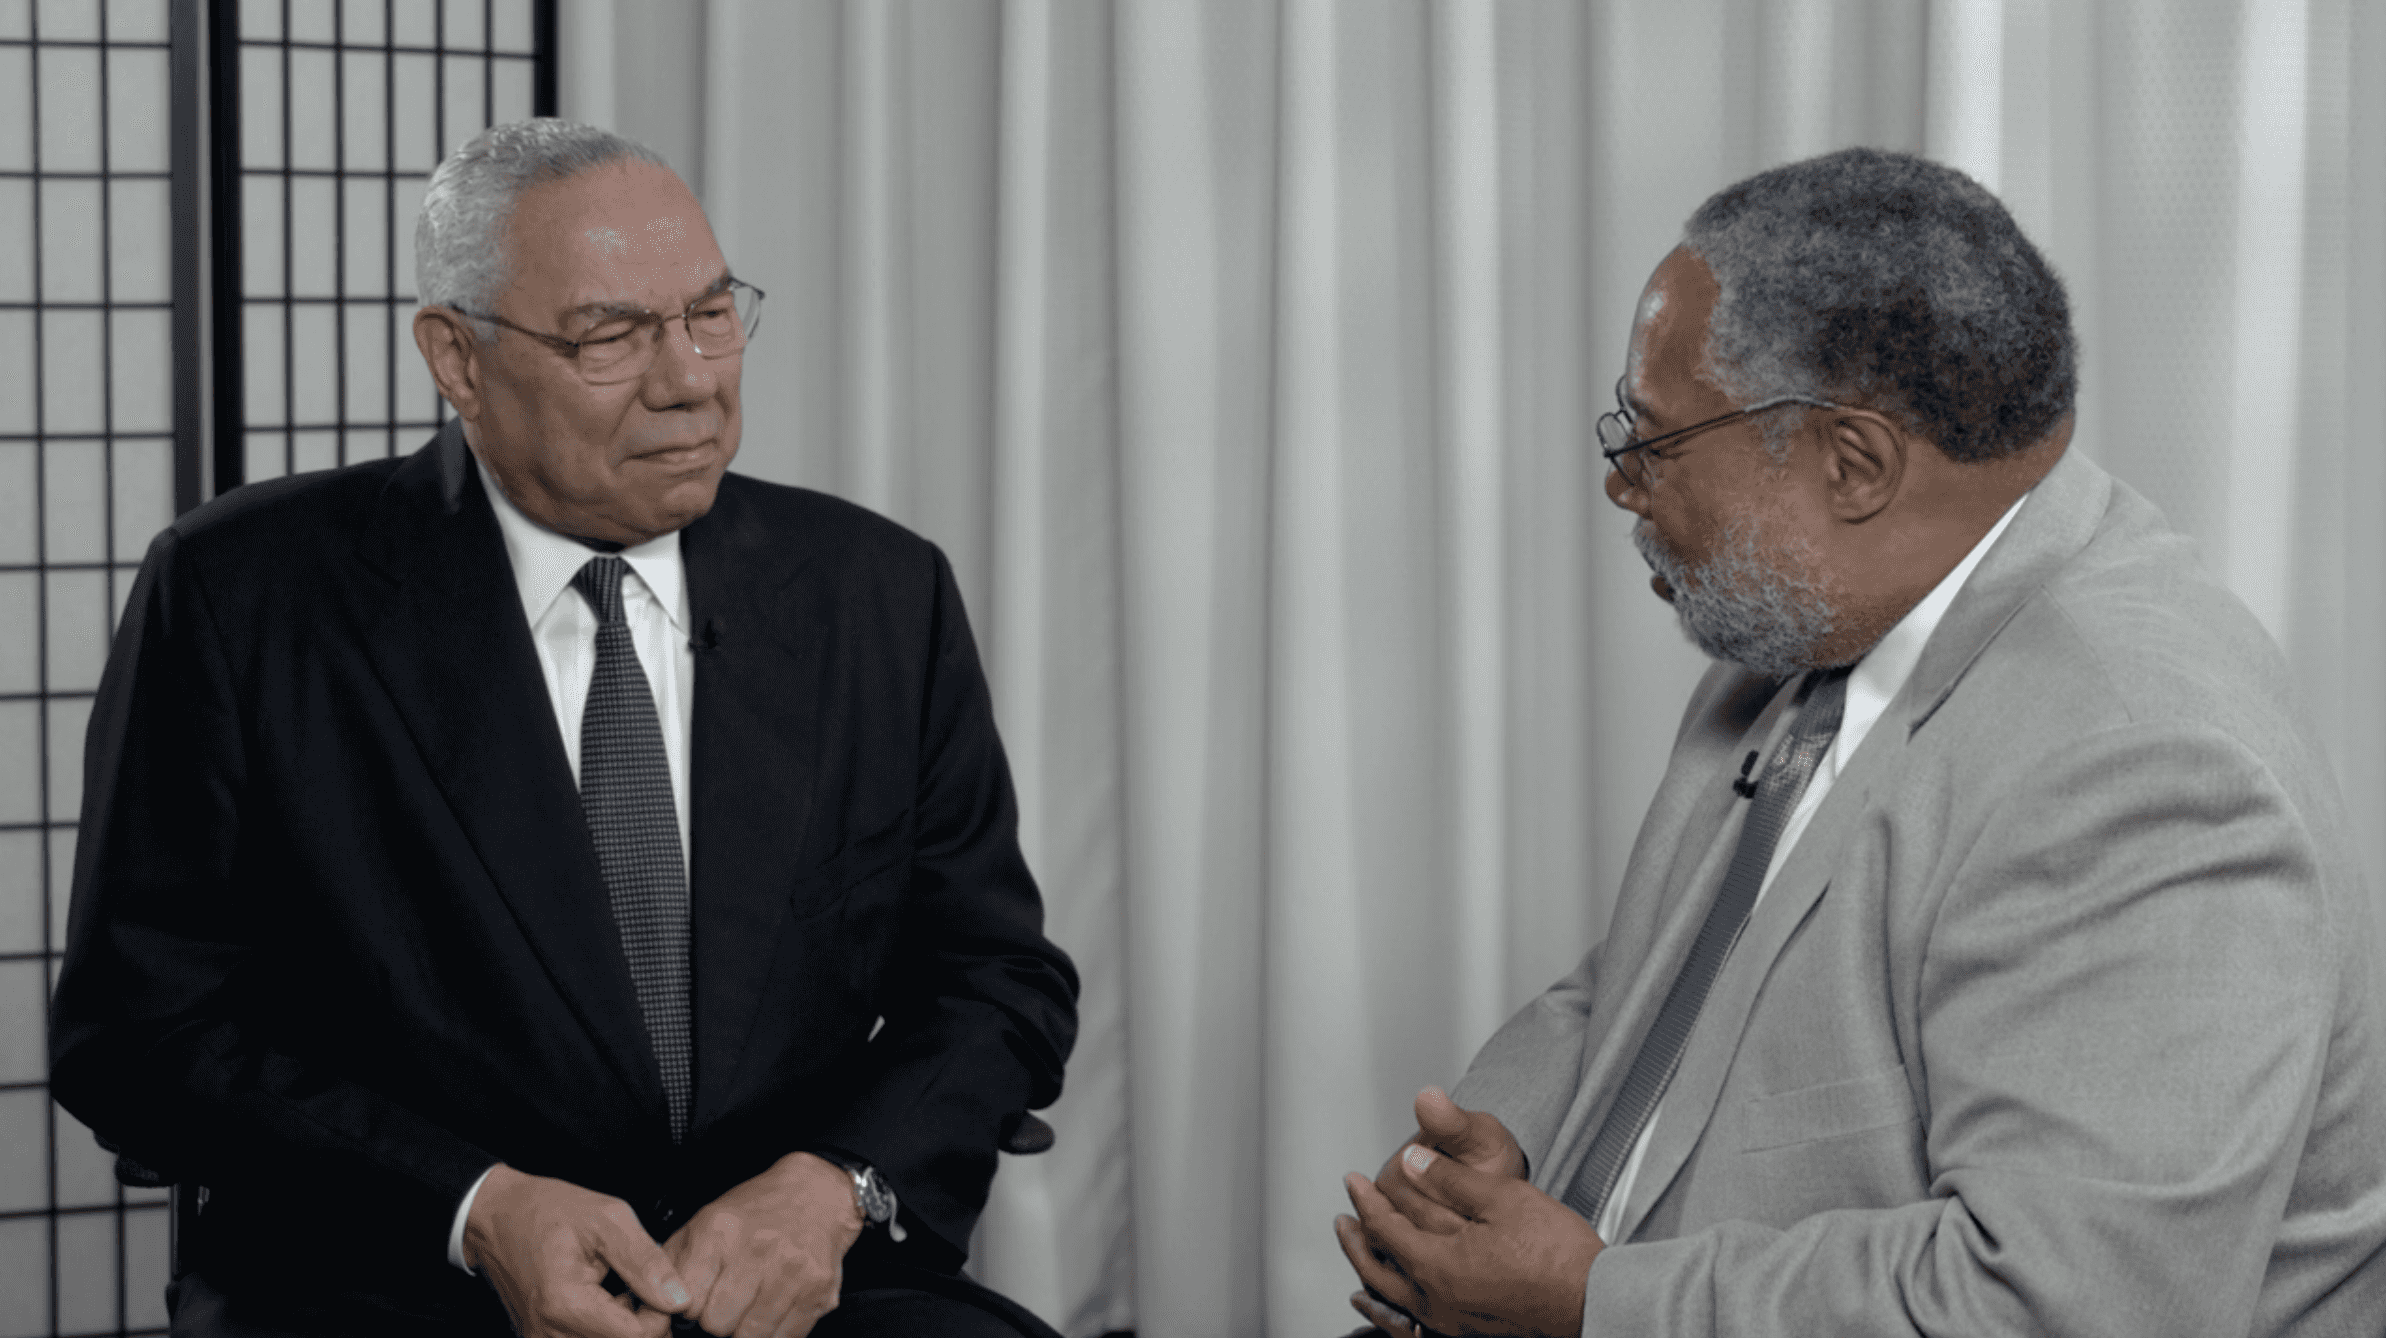 A photograph of Lonnie Bunch interviewing Colin Powell. Both men are dressed in suits, sitting and talking..